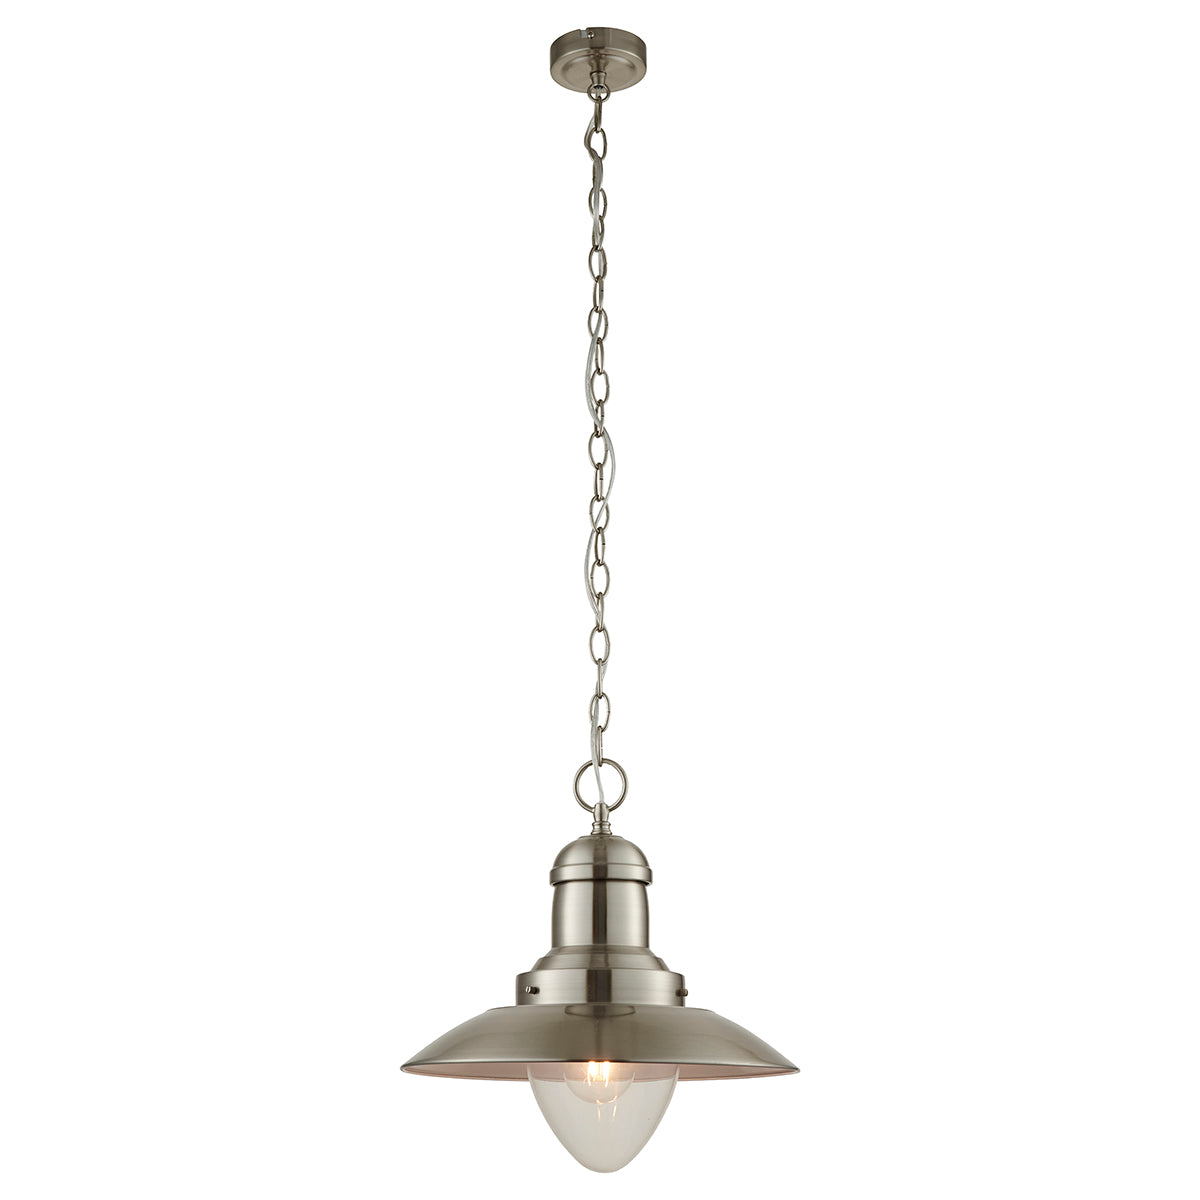 A Mendip Pendant Light with a glass shade for interior decor from Kikiathome.co.uk.